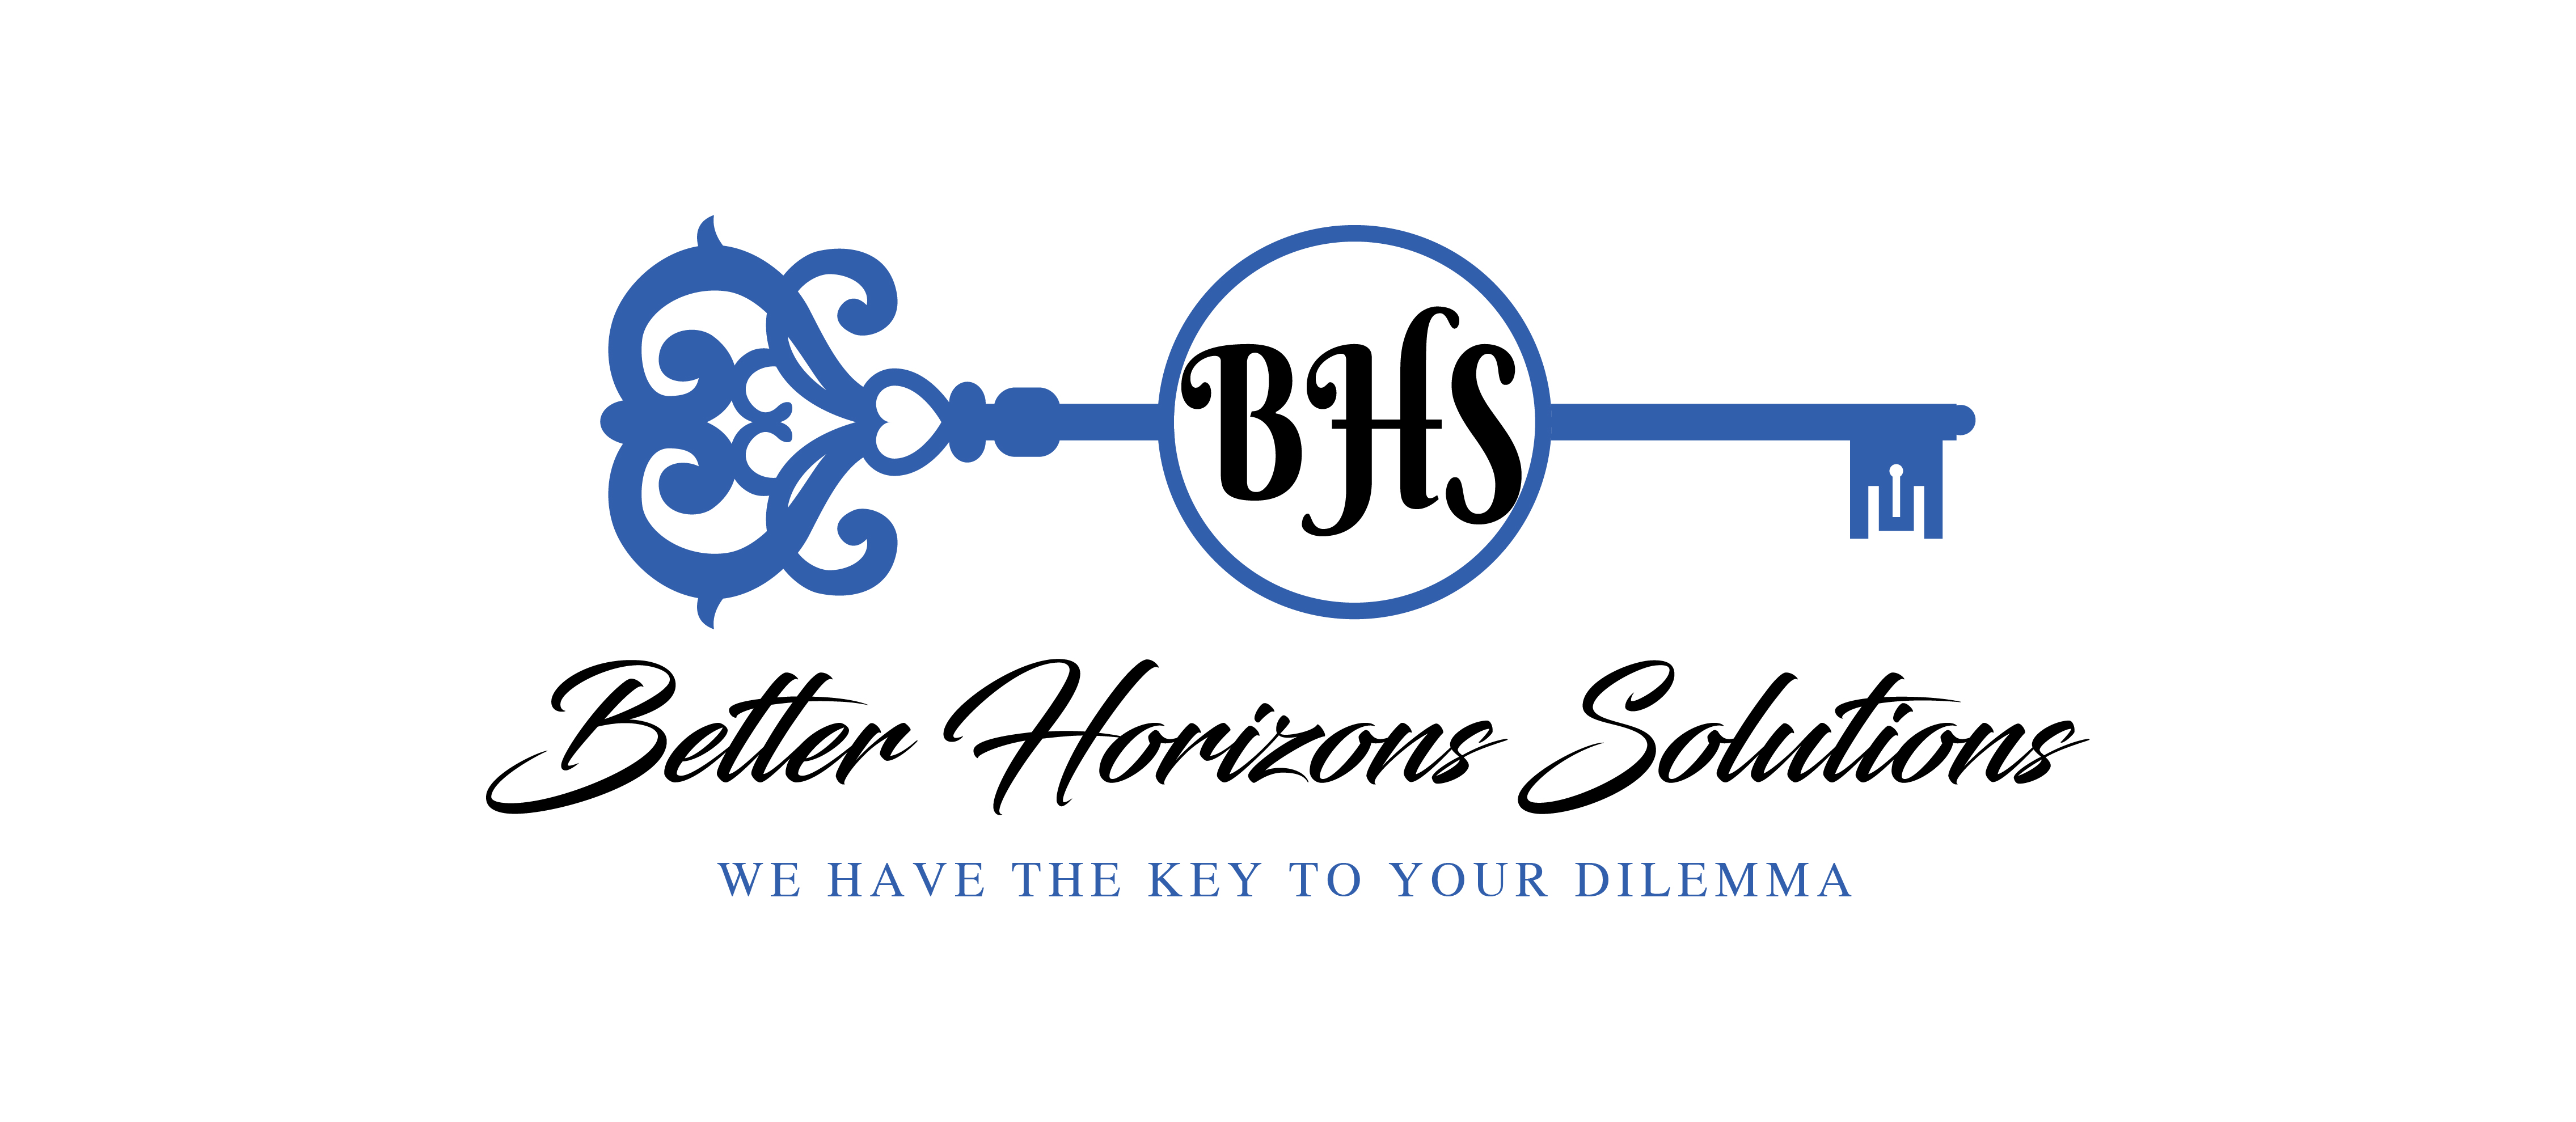 BHS Home Remodeling Services Corp. Logo